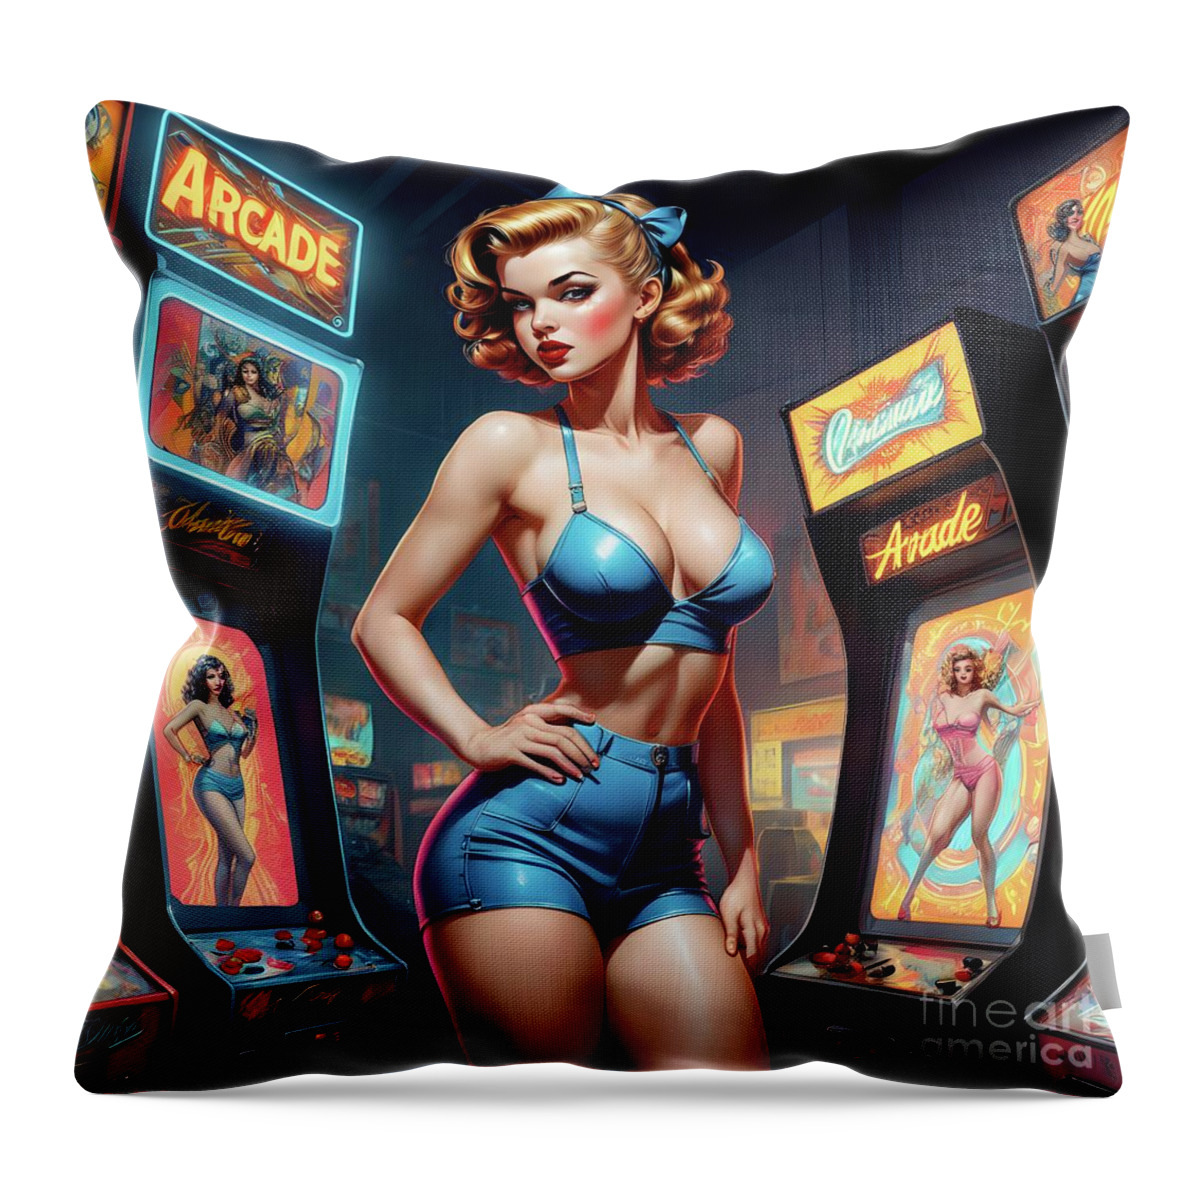 Game Throw Pillow featuring the digital art The arcade parlor by Sen Tinel